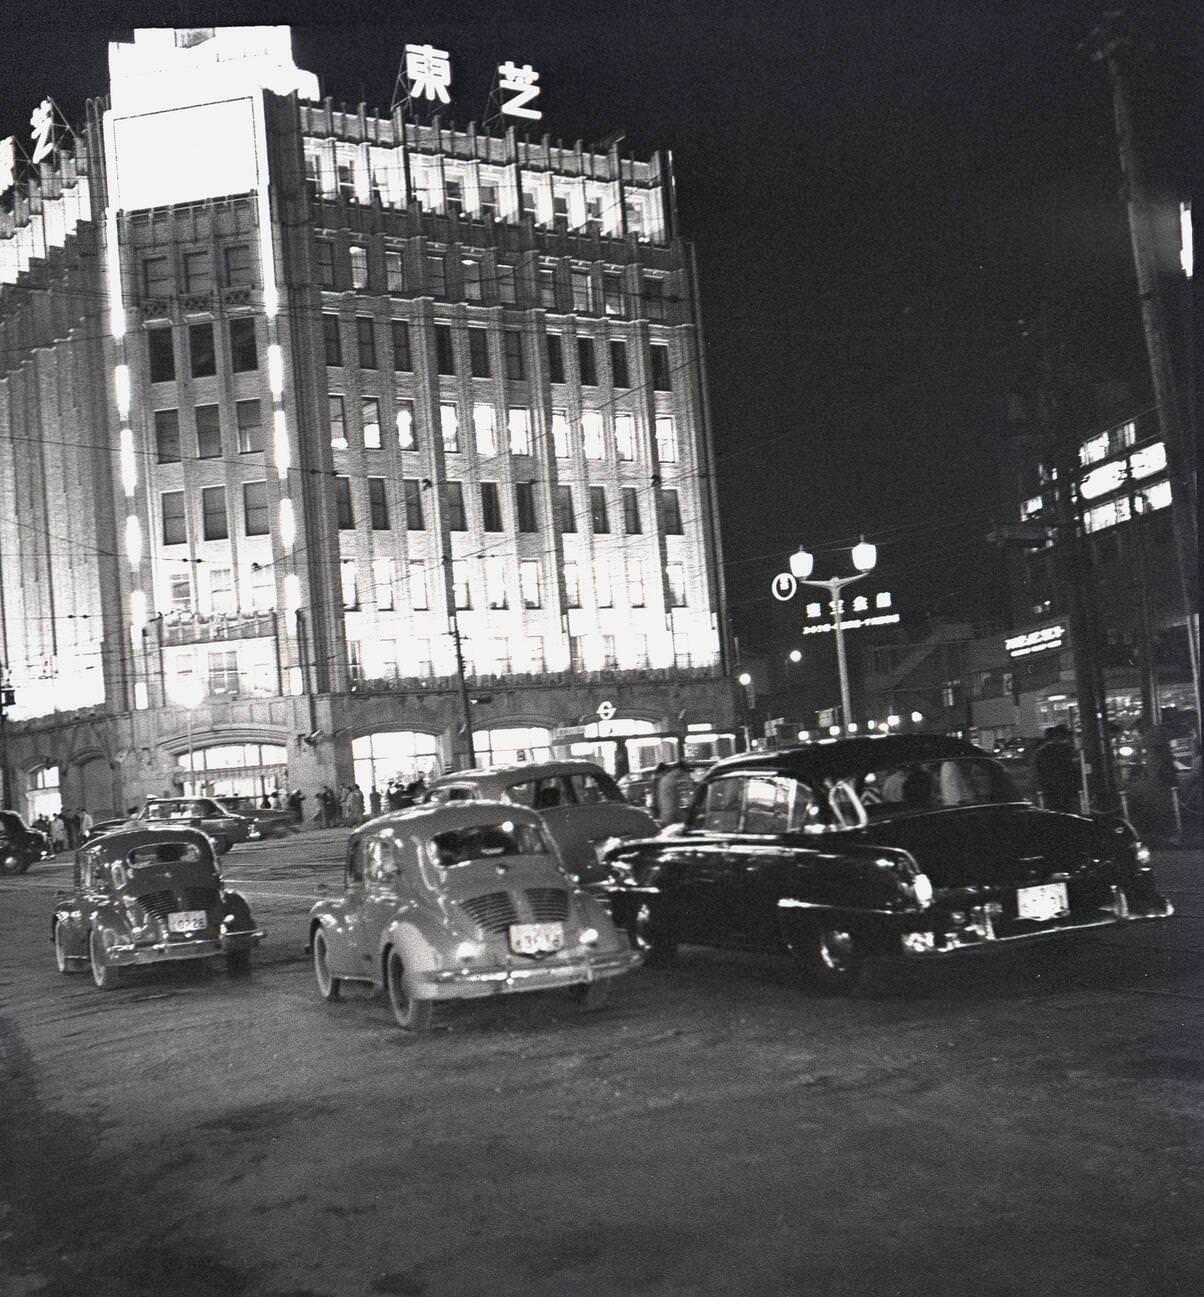 Evening time in Tokyo, lit up buildings and motorcars, 1950s.